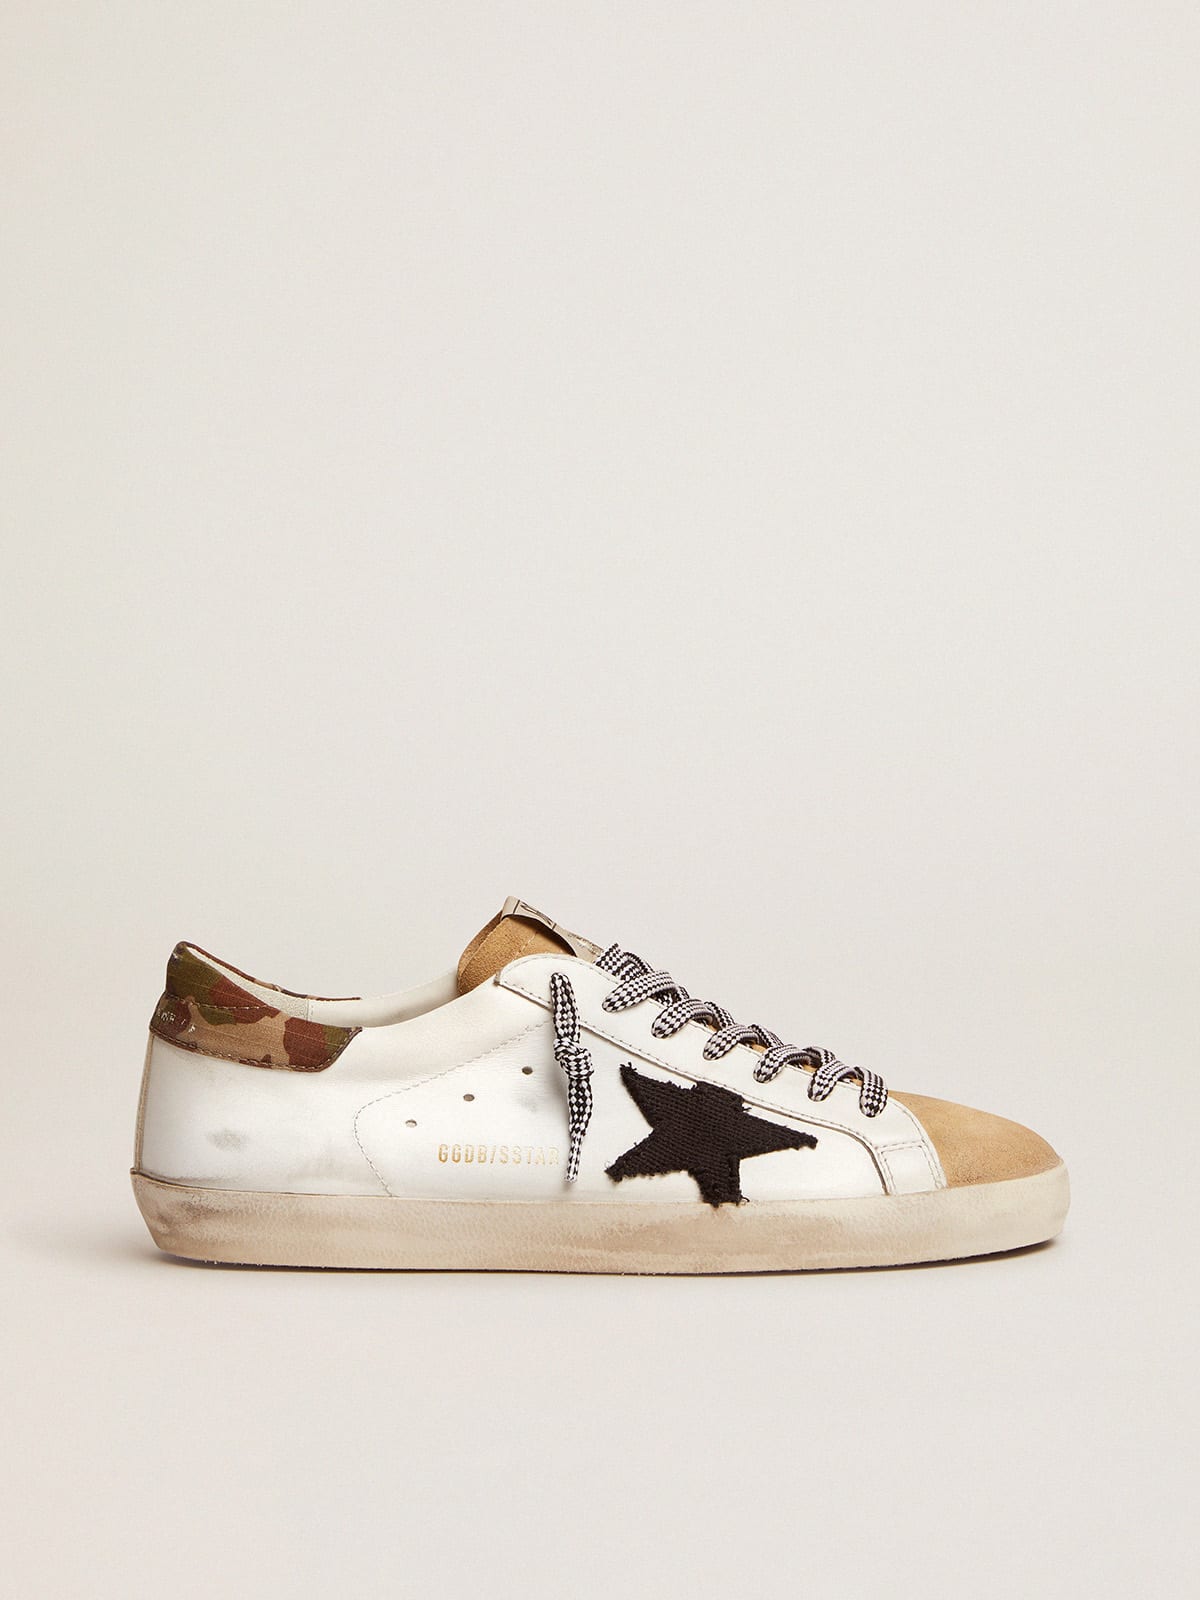 Super-Star LTD sneakers in white leather with camouflage heel tab and black  star | Golden Goose